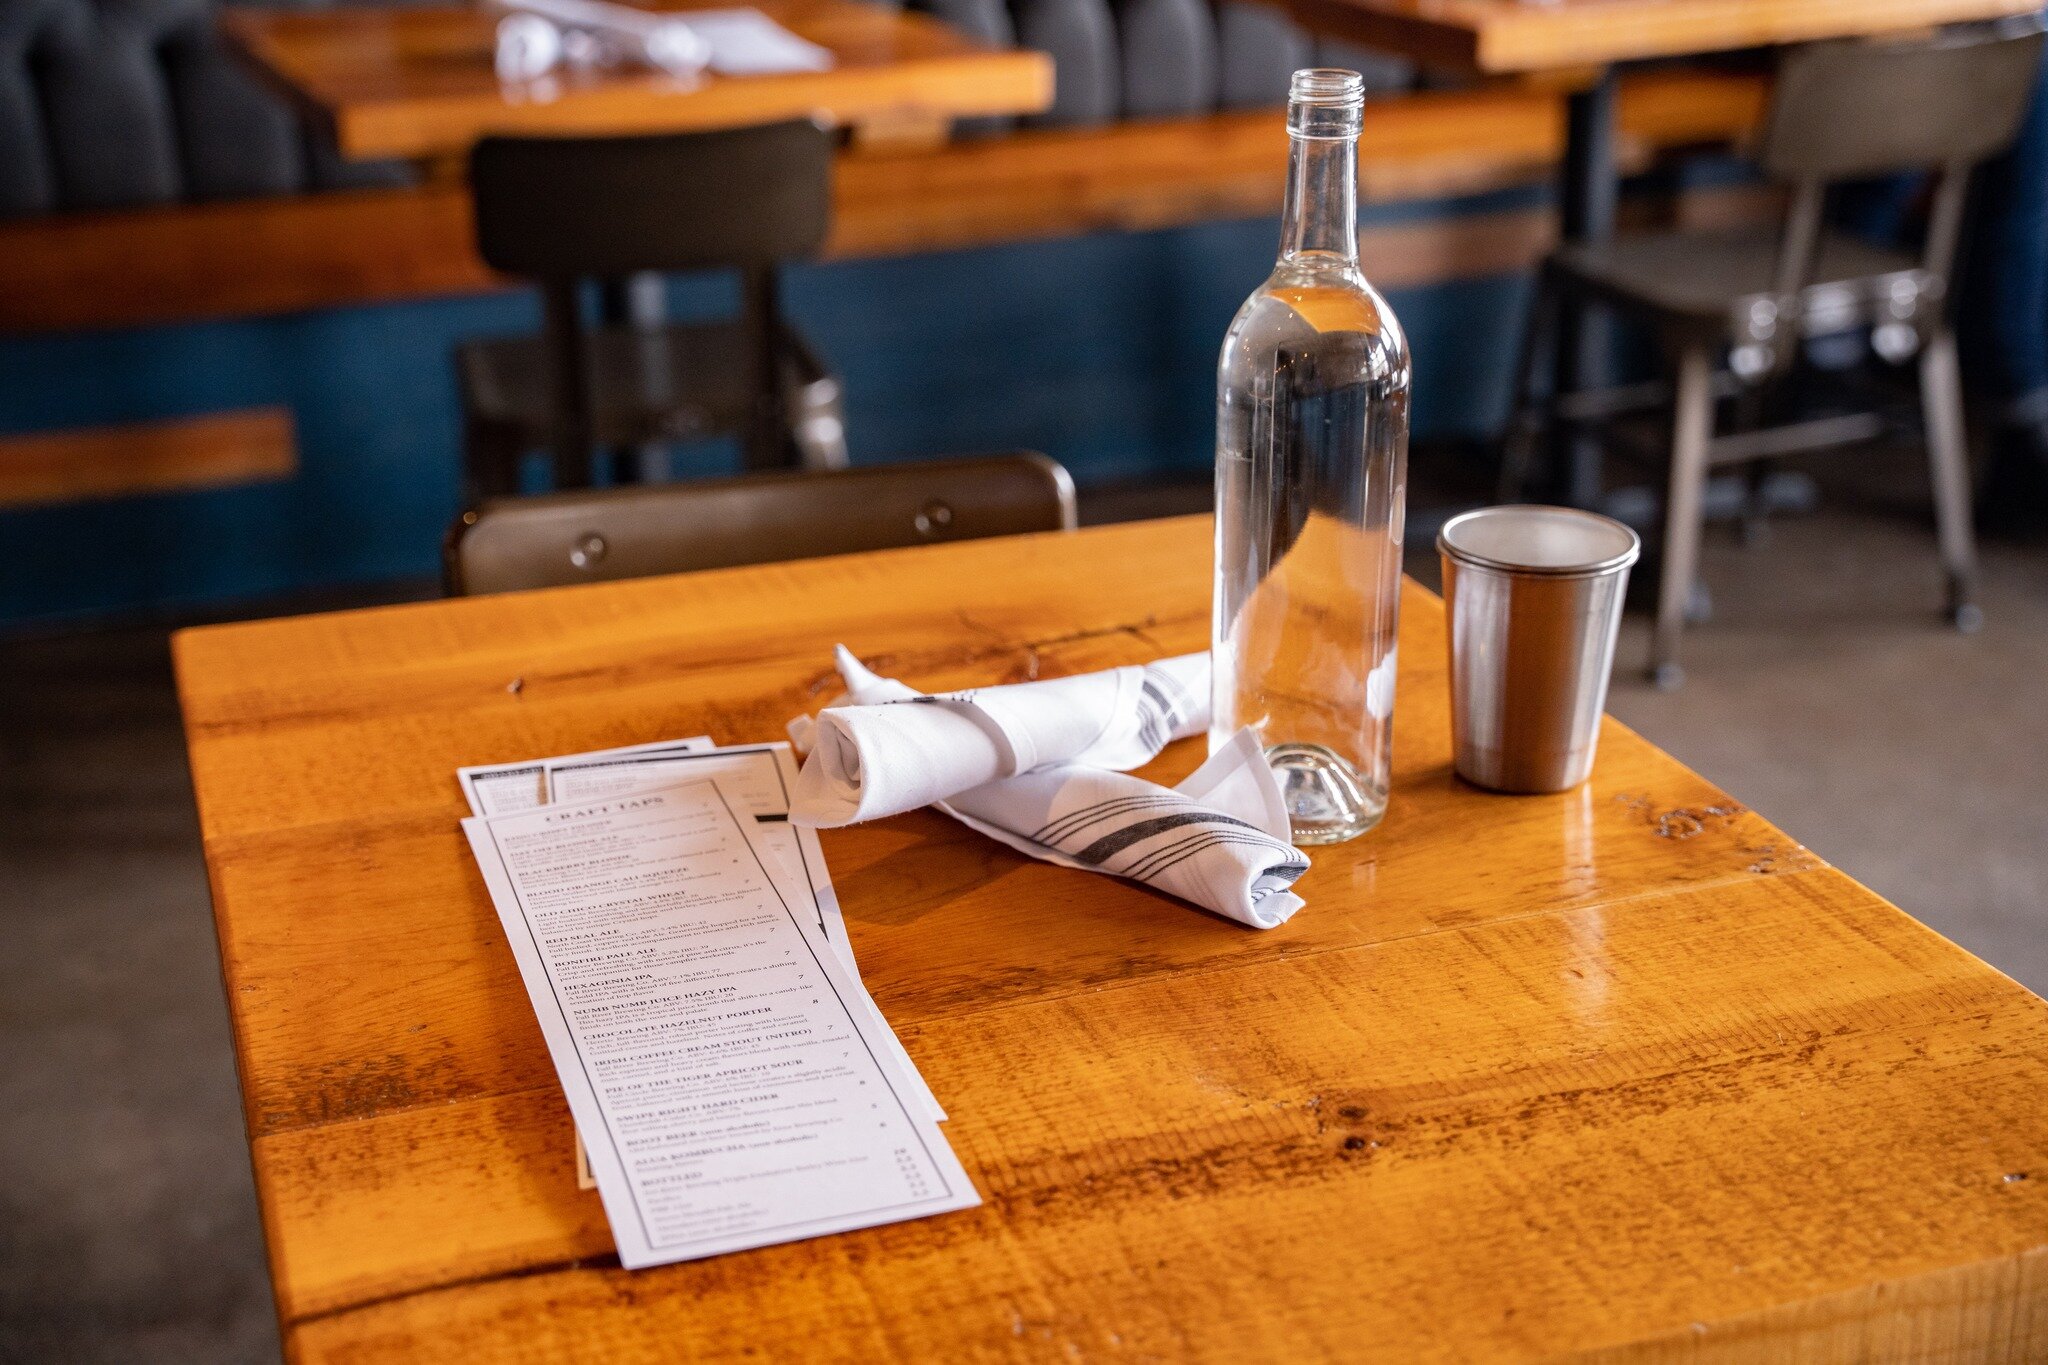 Your table is waiting for you! 
#pipelinecrafttapsandkitchen #pipelinecrafttaps #pipelinemtshasta #mtshastaeats #visitmtshasta #seesiskiyou  #craftbeer